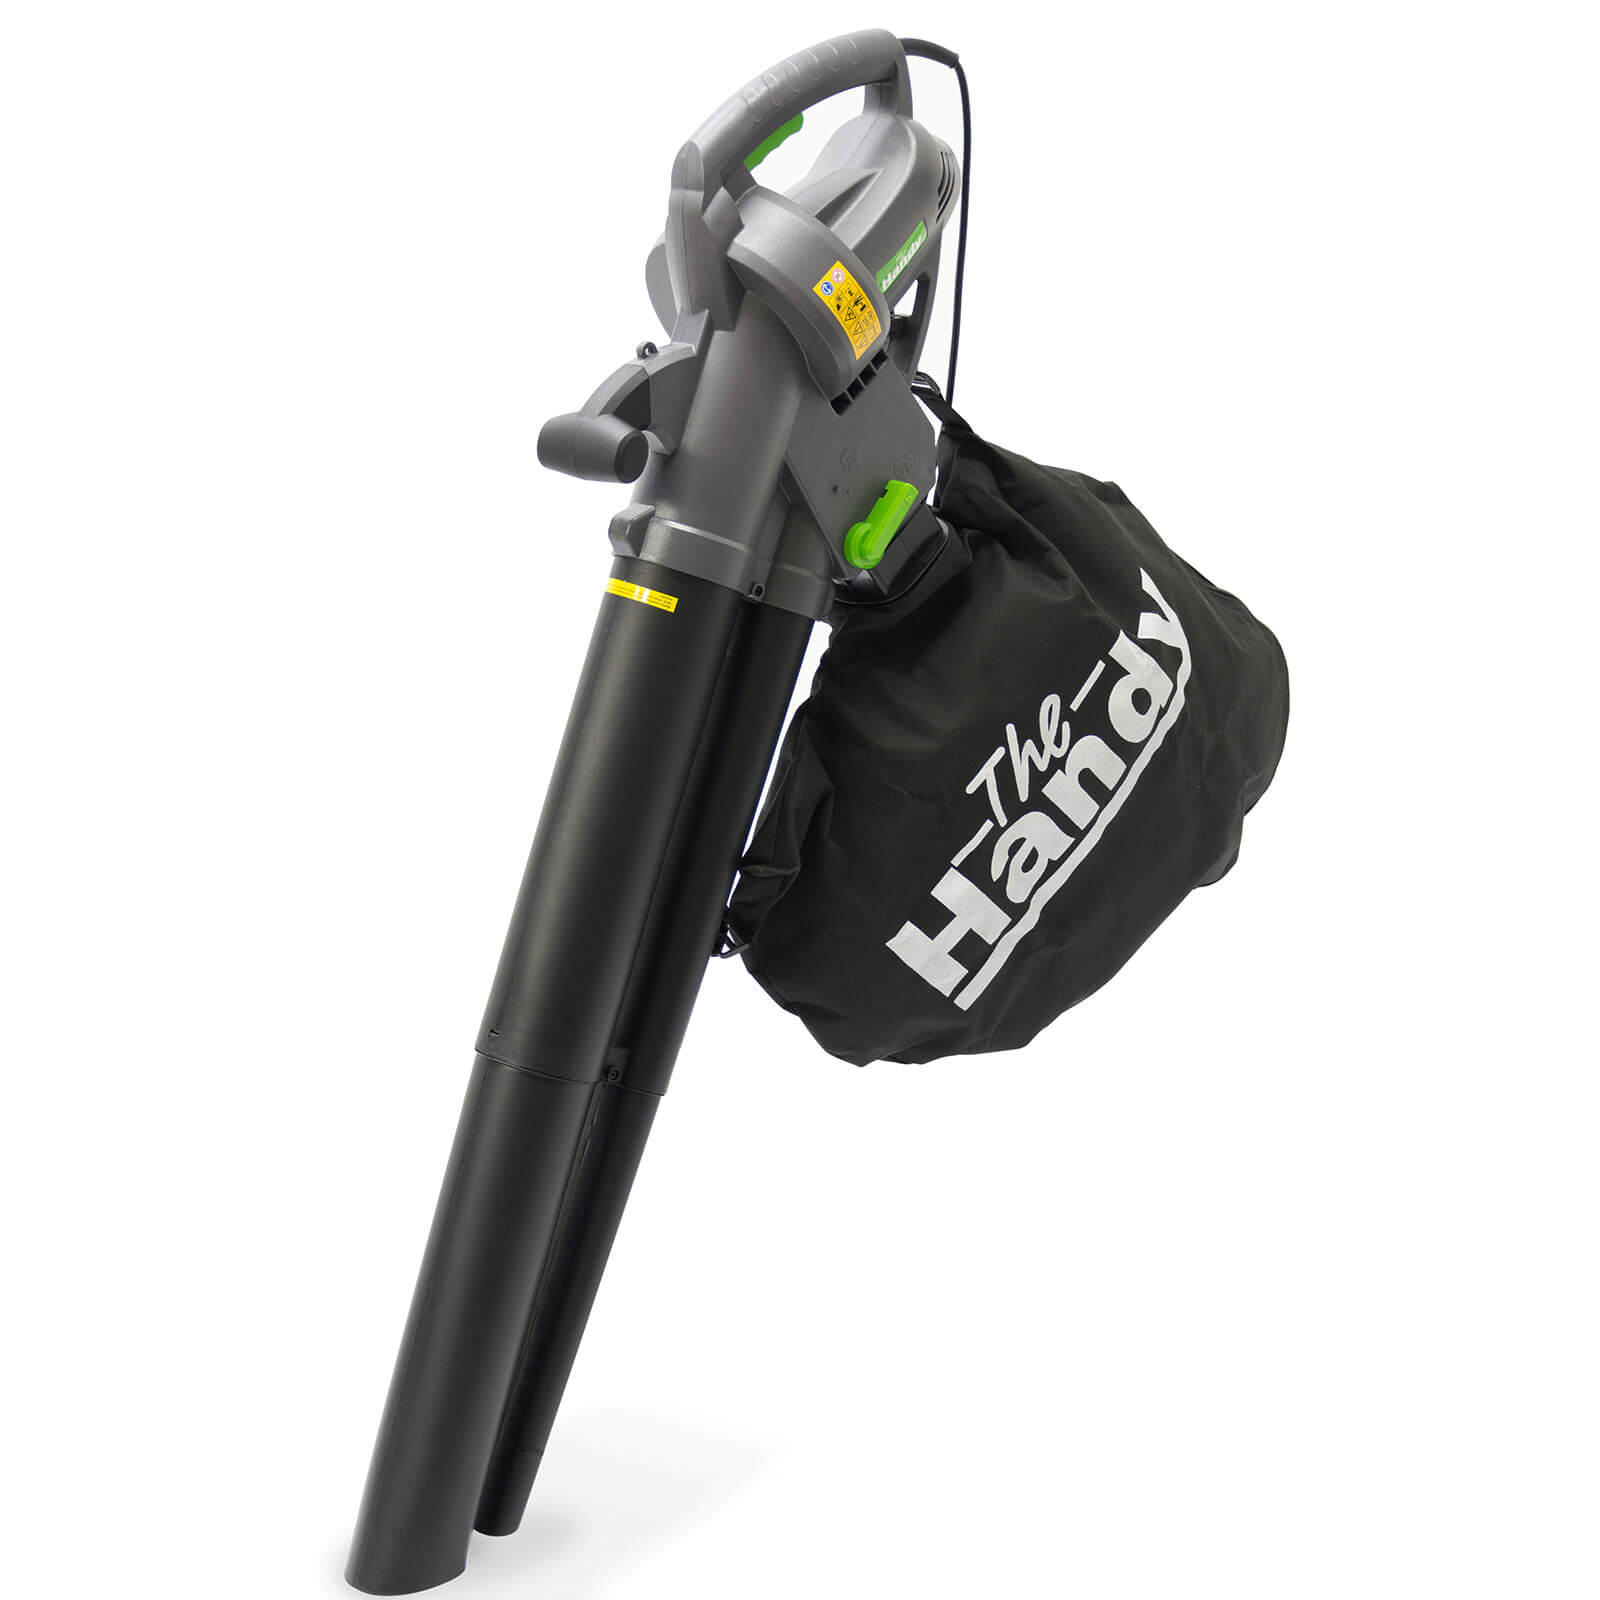 Image of Handy THEV2600 Garden Vacuum and Leaf Blower 240v